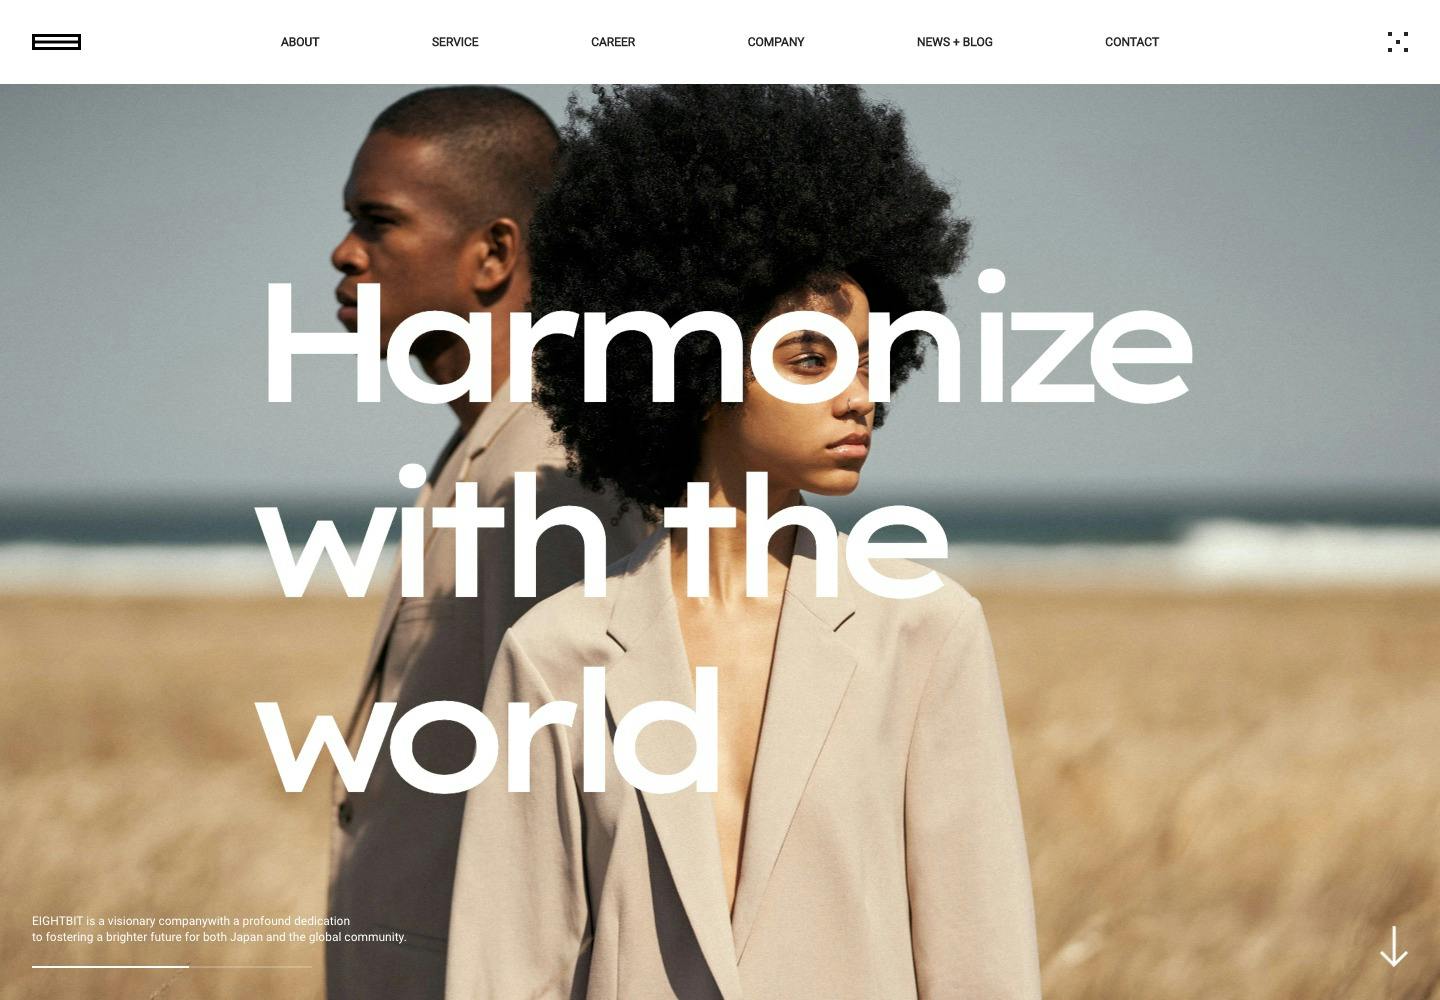 Cover Image for EIGHTBIT Co., Ltd. | Harmonize with the world